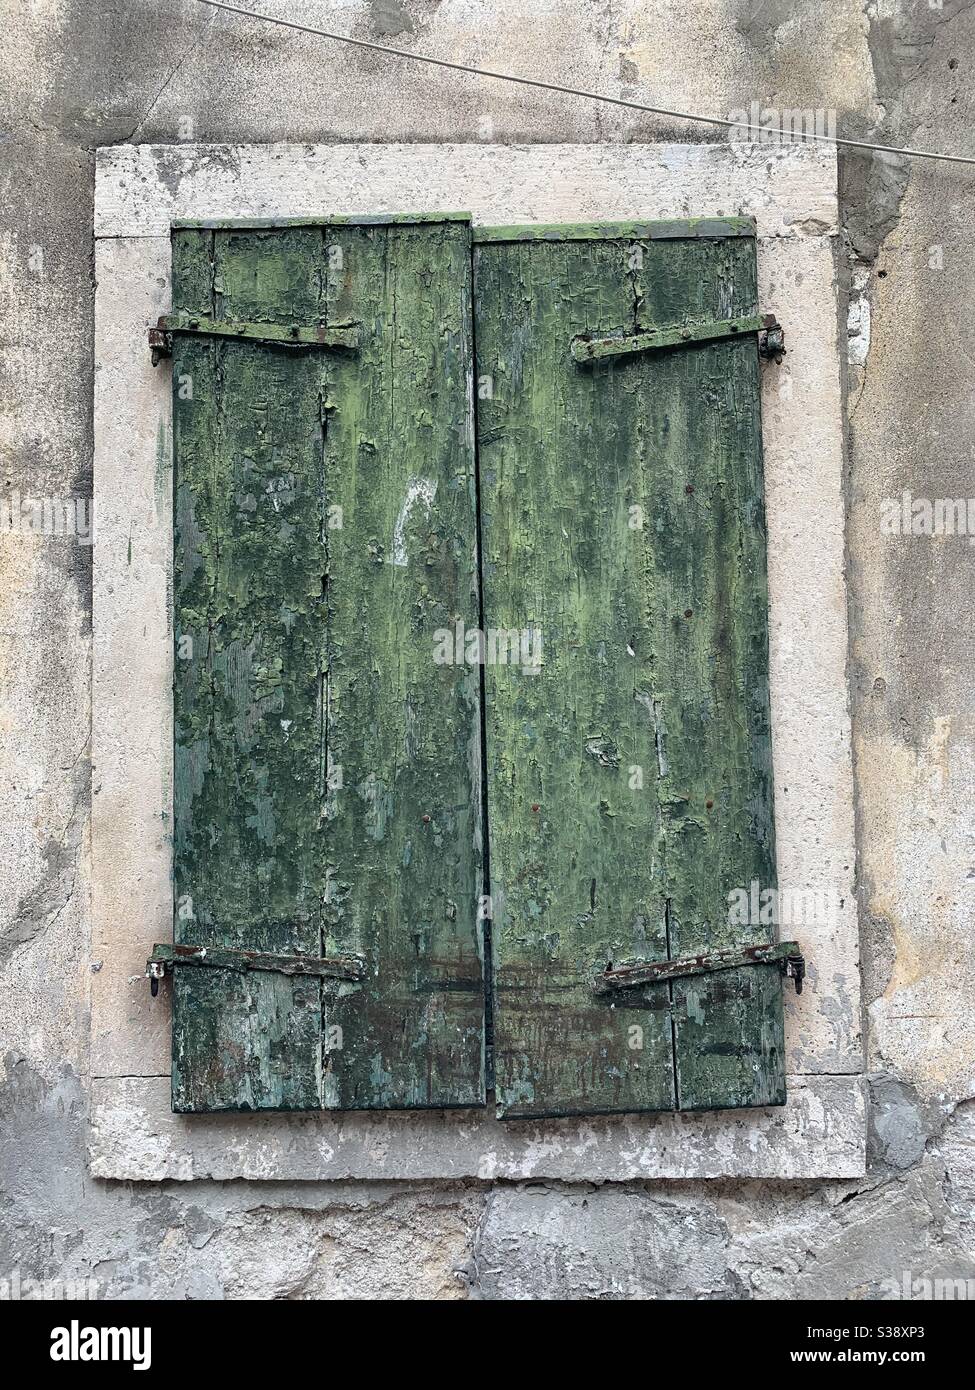 Rustic old shutter window with flaking paint Stock Photo